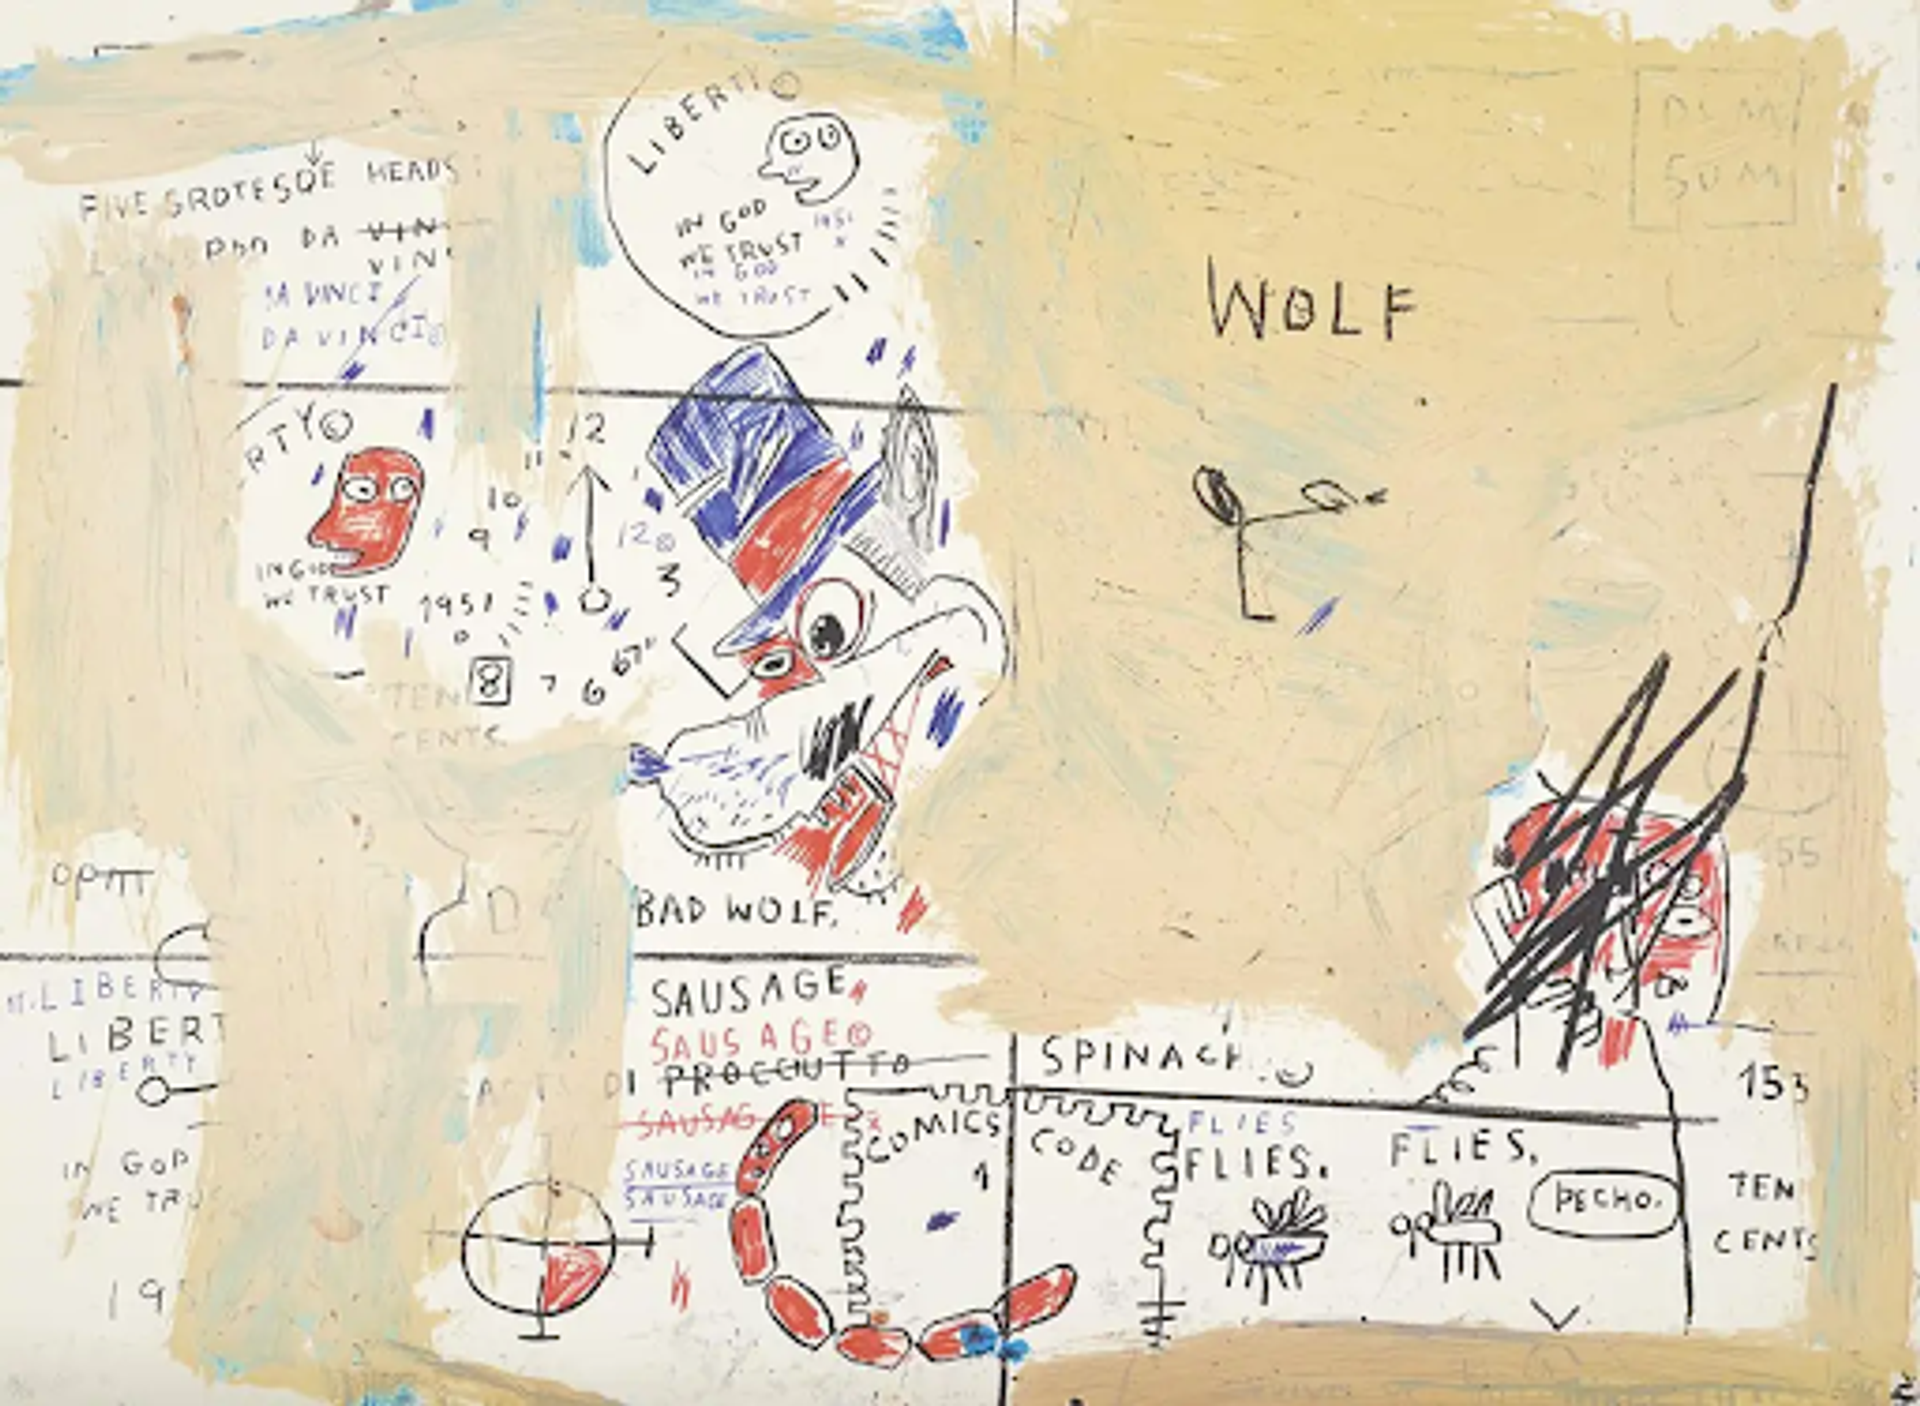 Jean-Michel Basquiat’s Wolf Sausage. A Neo Expressionist screenprint of a wolf character with a link of sausage below it surrounded by texts and various icons.